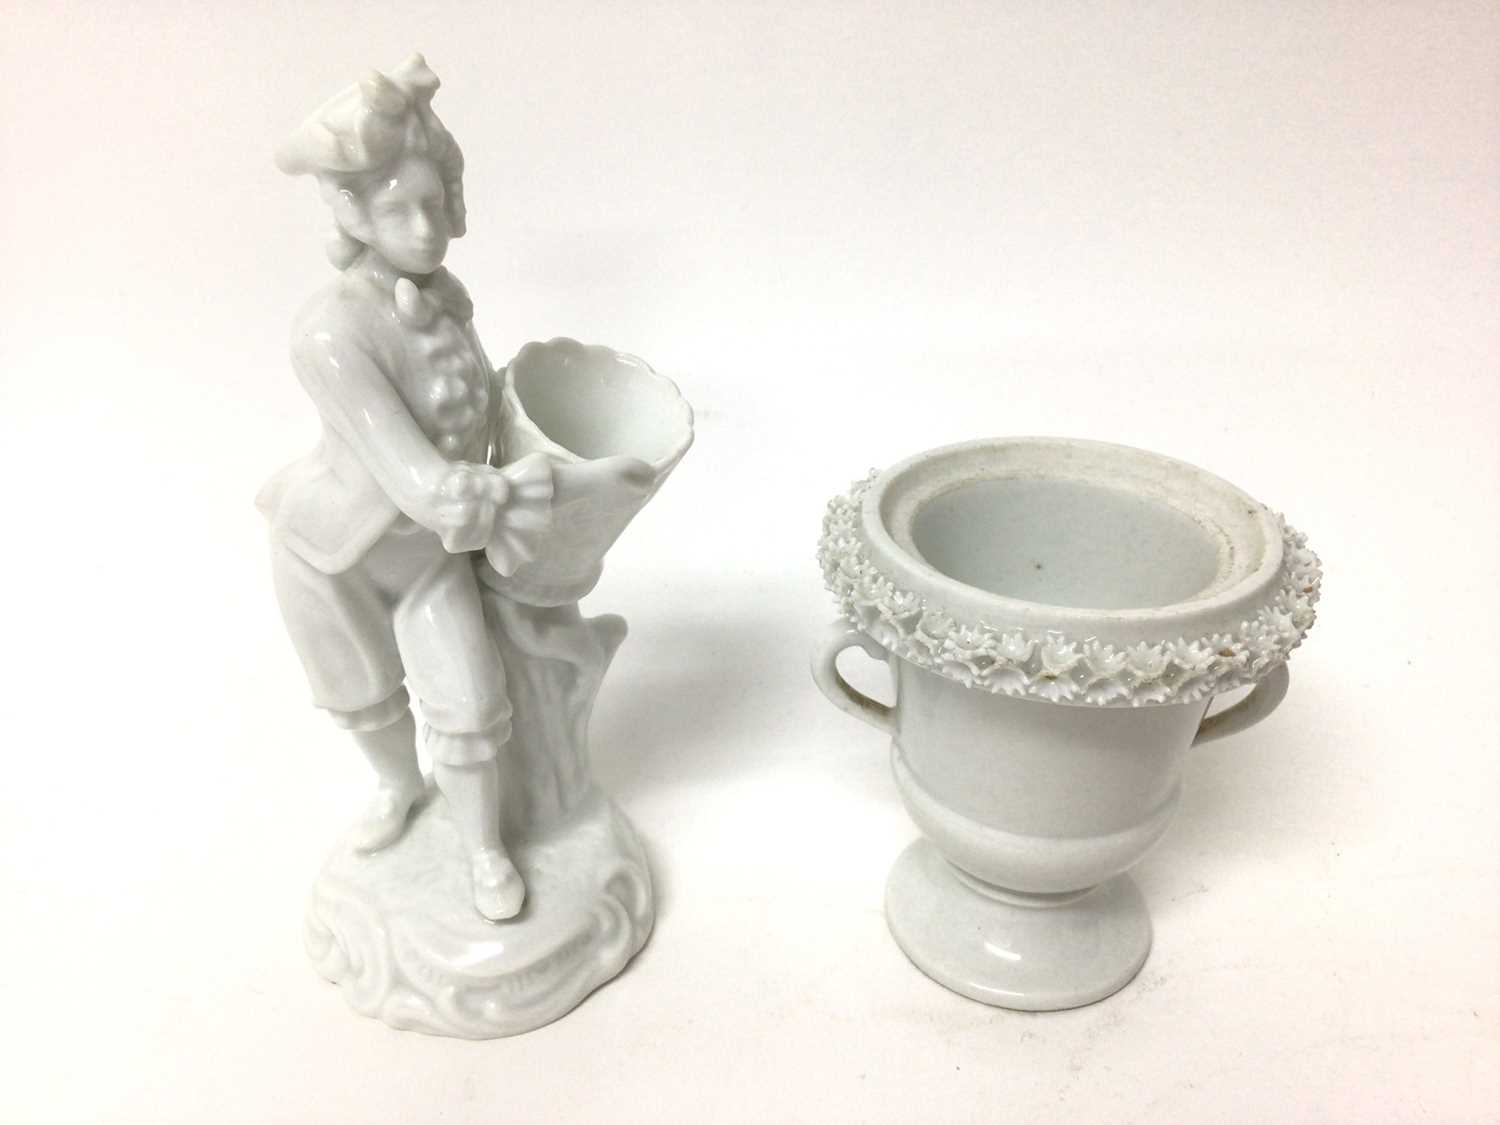 Lot 155 - A Continental porcelain figure with a basket, and a Continental porcelain small two handled vase